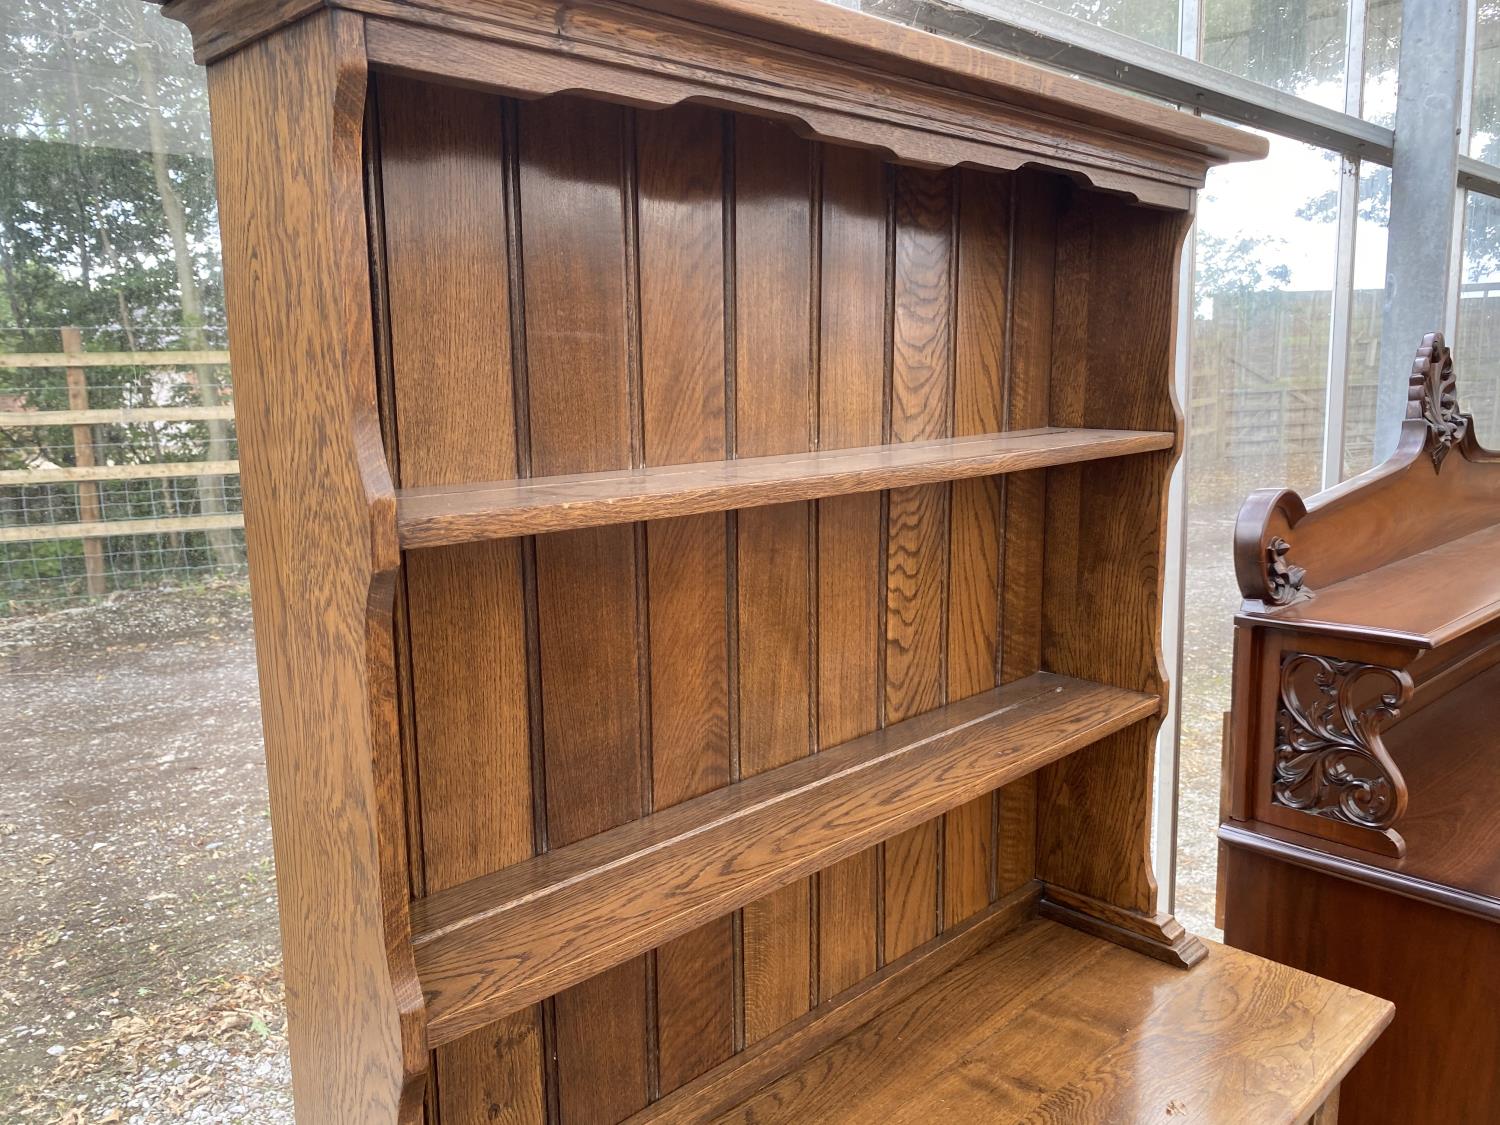 AN OAK WELSH DRESSER WITH TWO DOORS, TWO DRAWERS AND UPPER PLATE RACK - Image 2 of 4